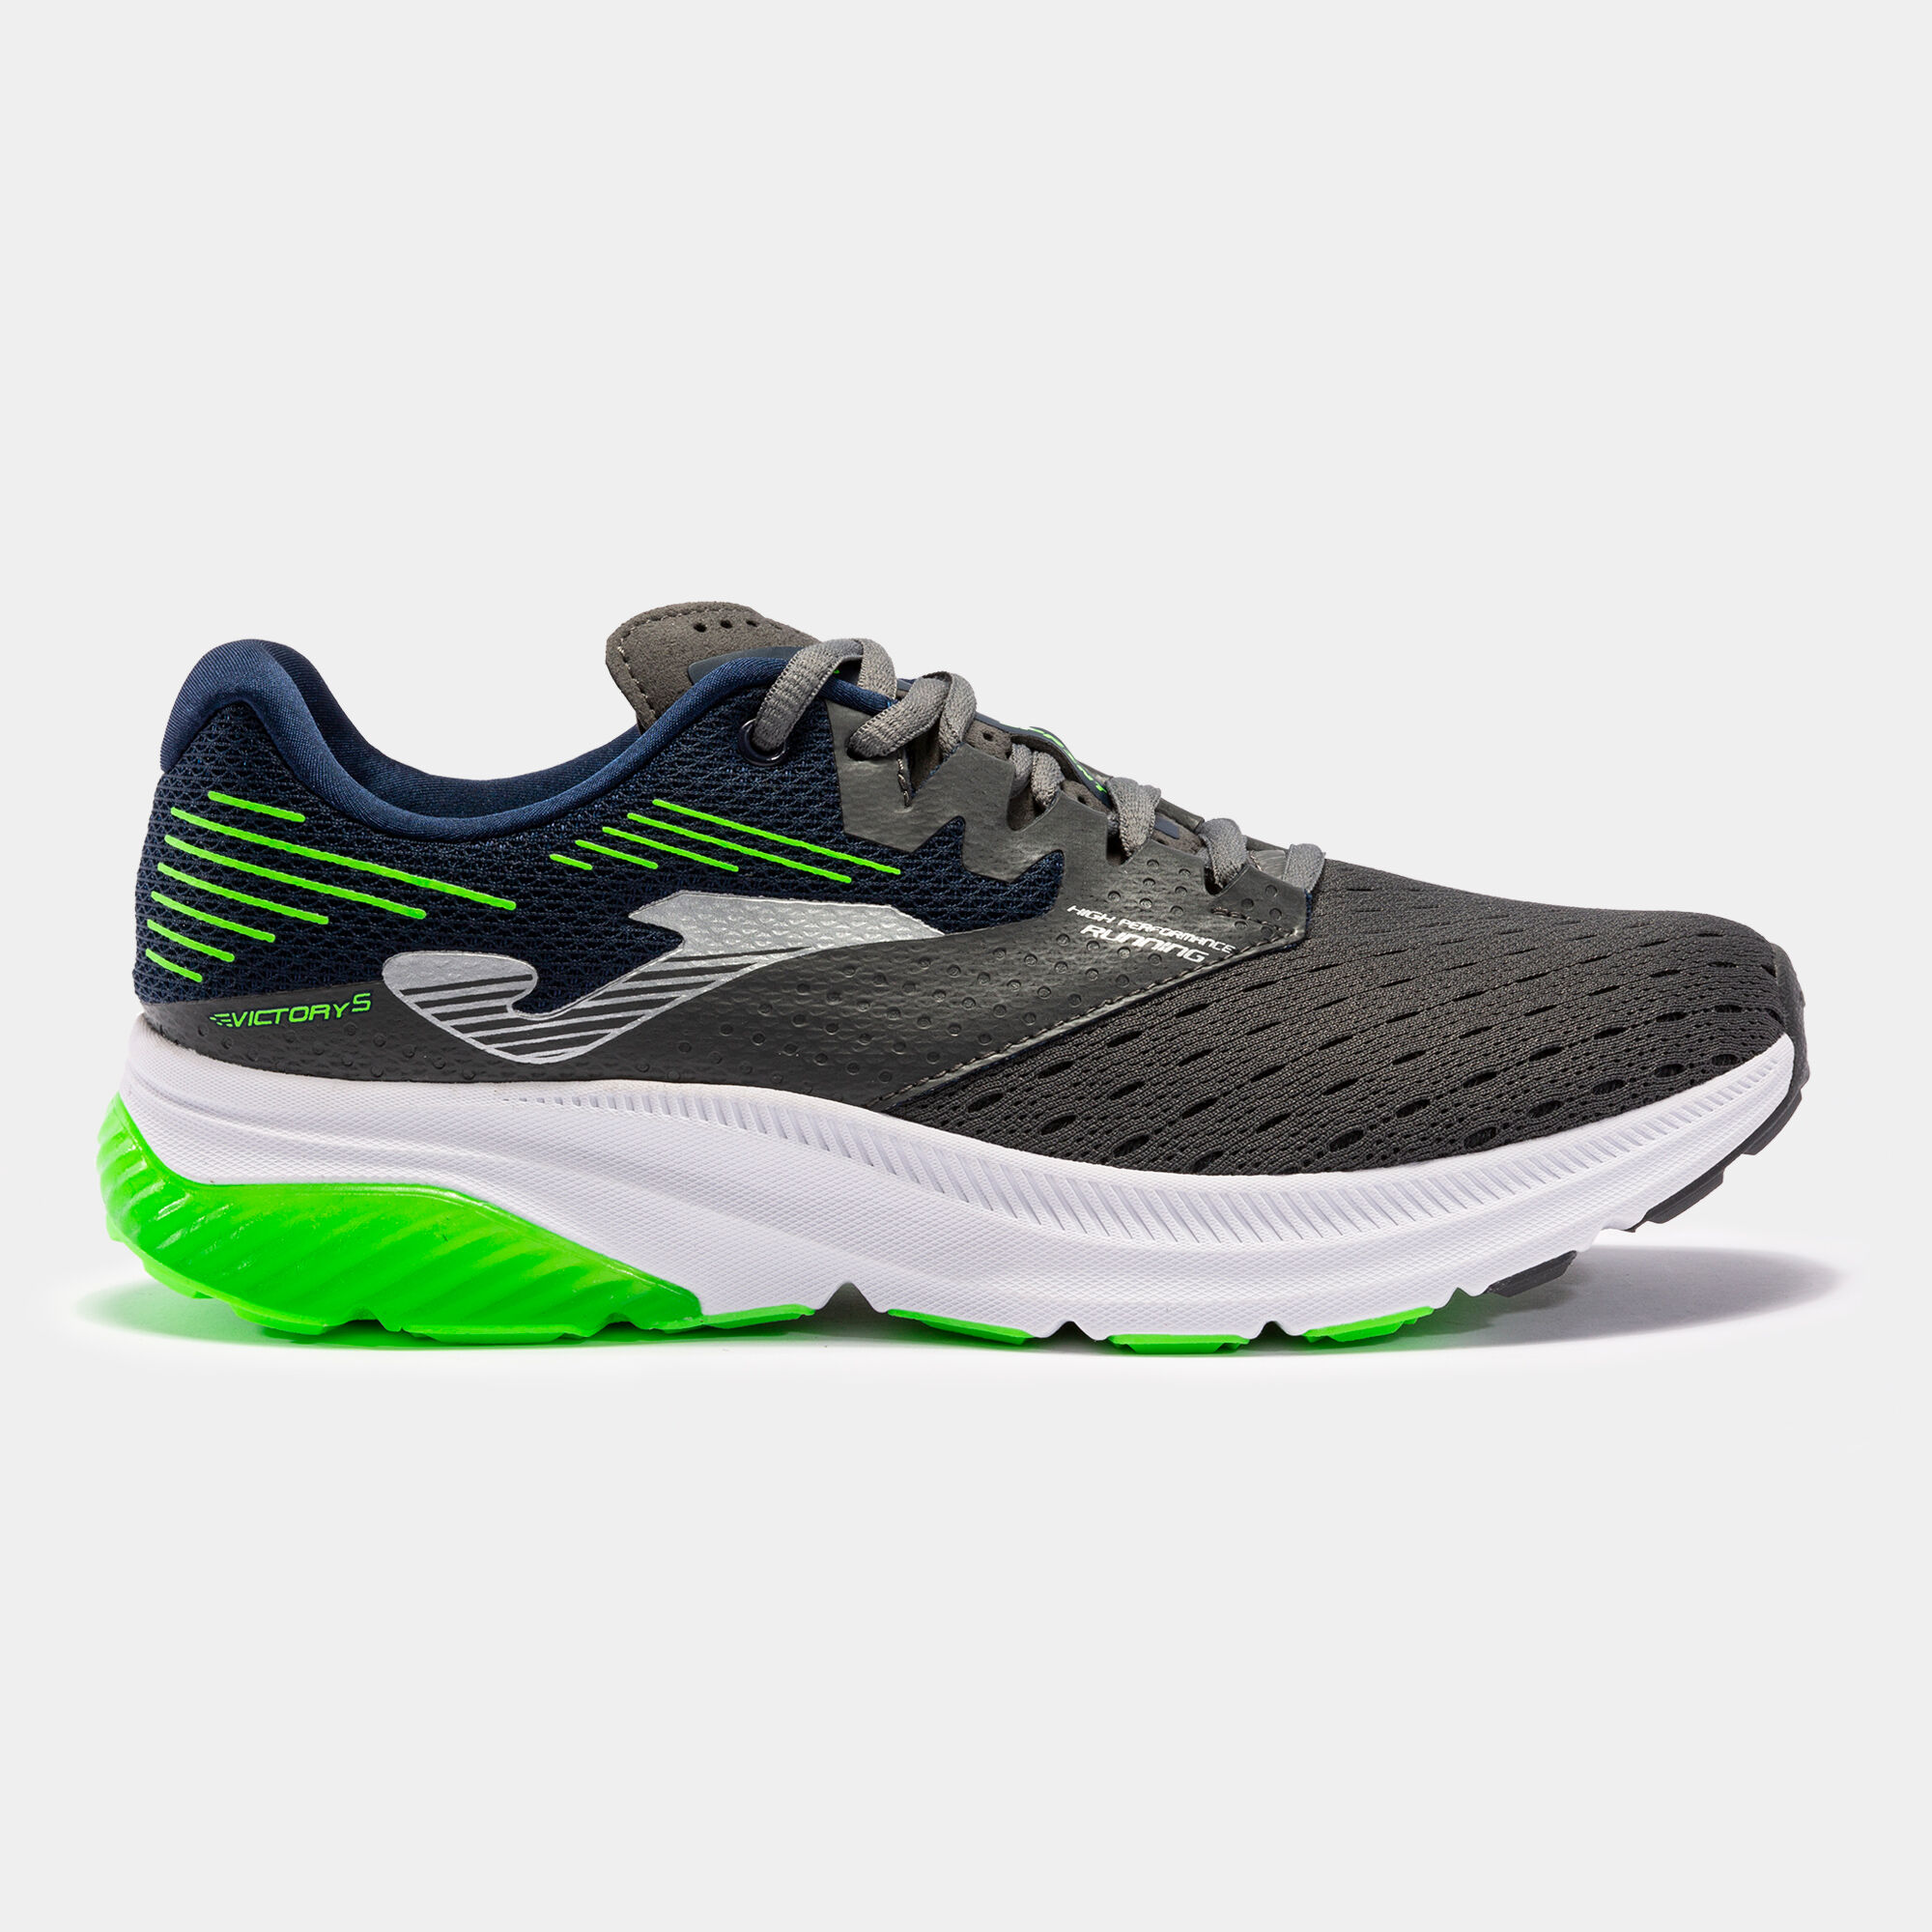 Chaussures running Victory 22 homme gris vert fluo